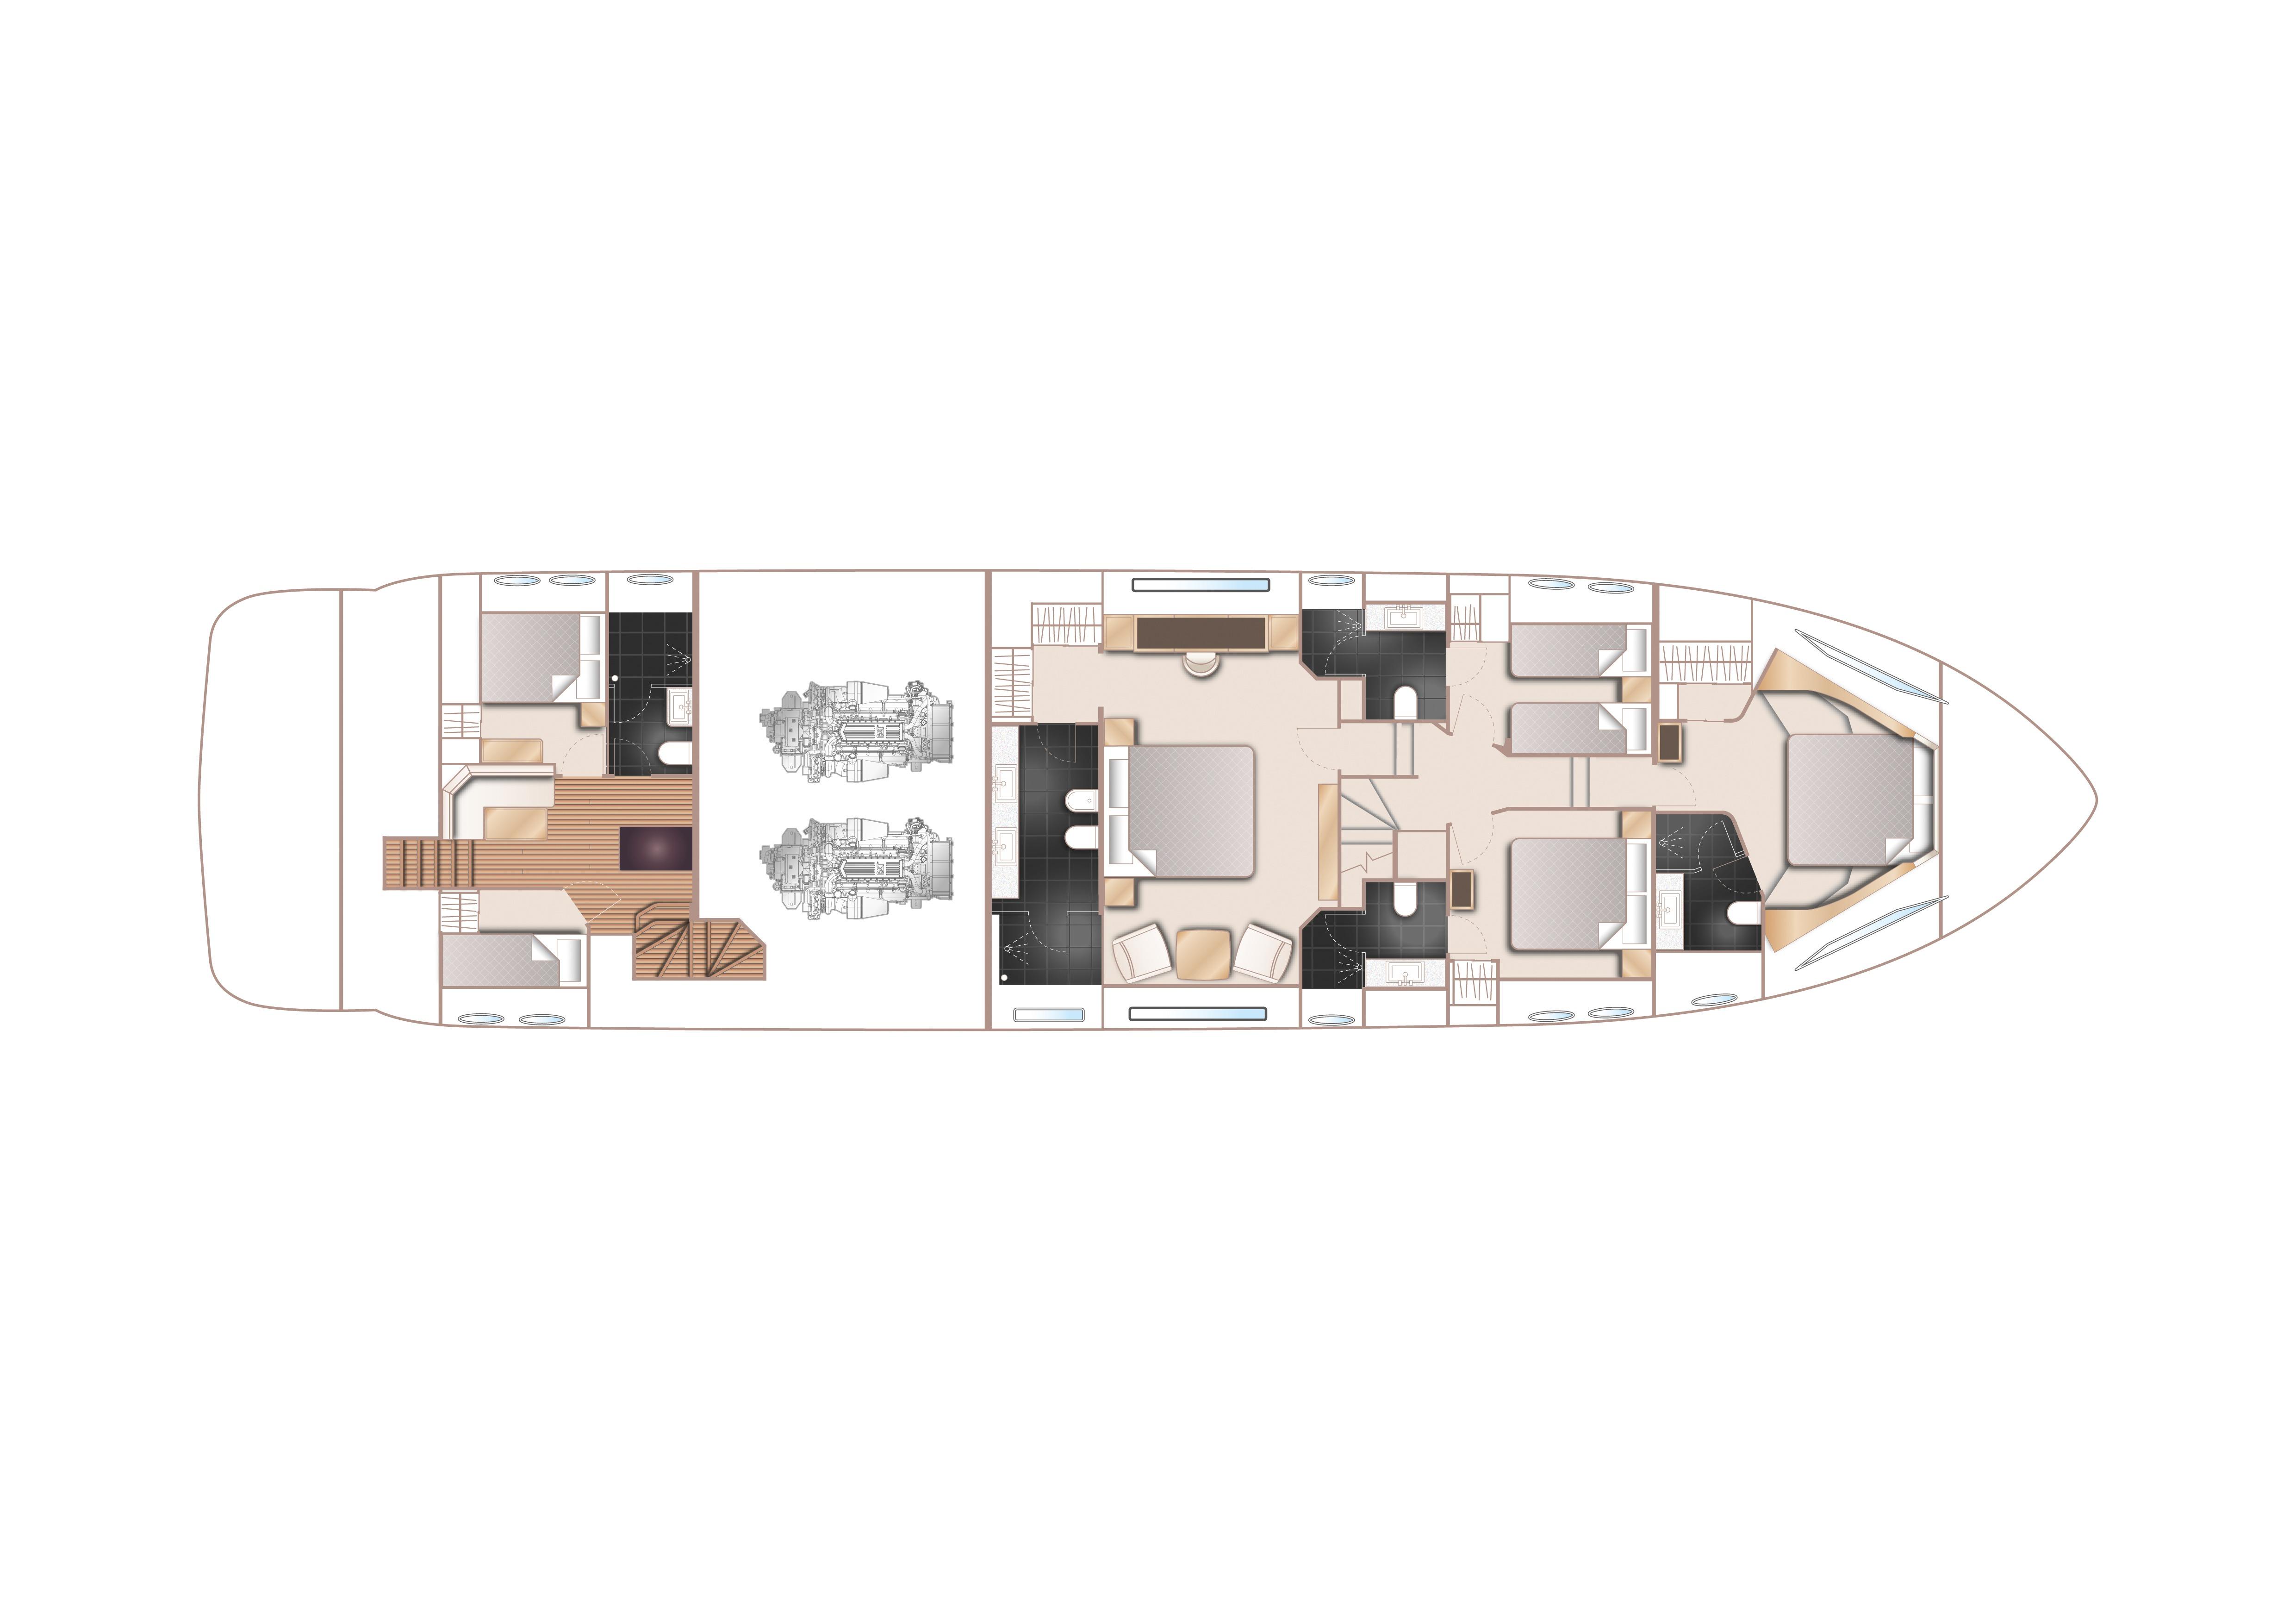  Yacht Photos Pics Manufacturer Provided Image: Princess 88 Motor Yacht Lower Deck Layout Plan